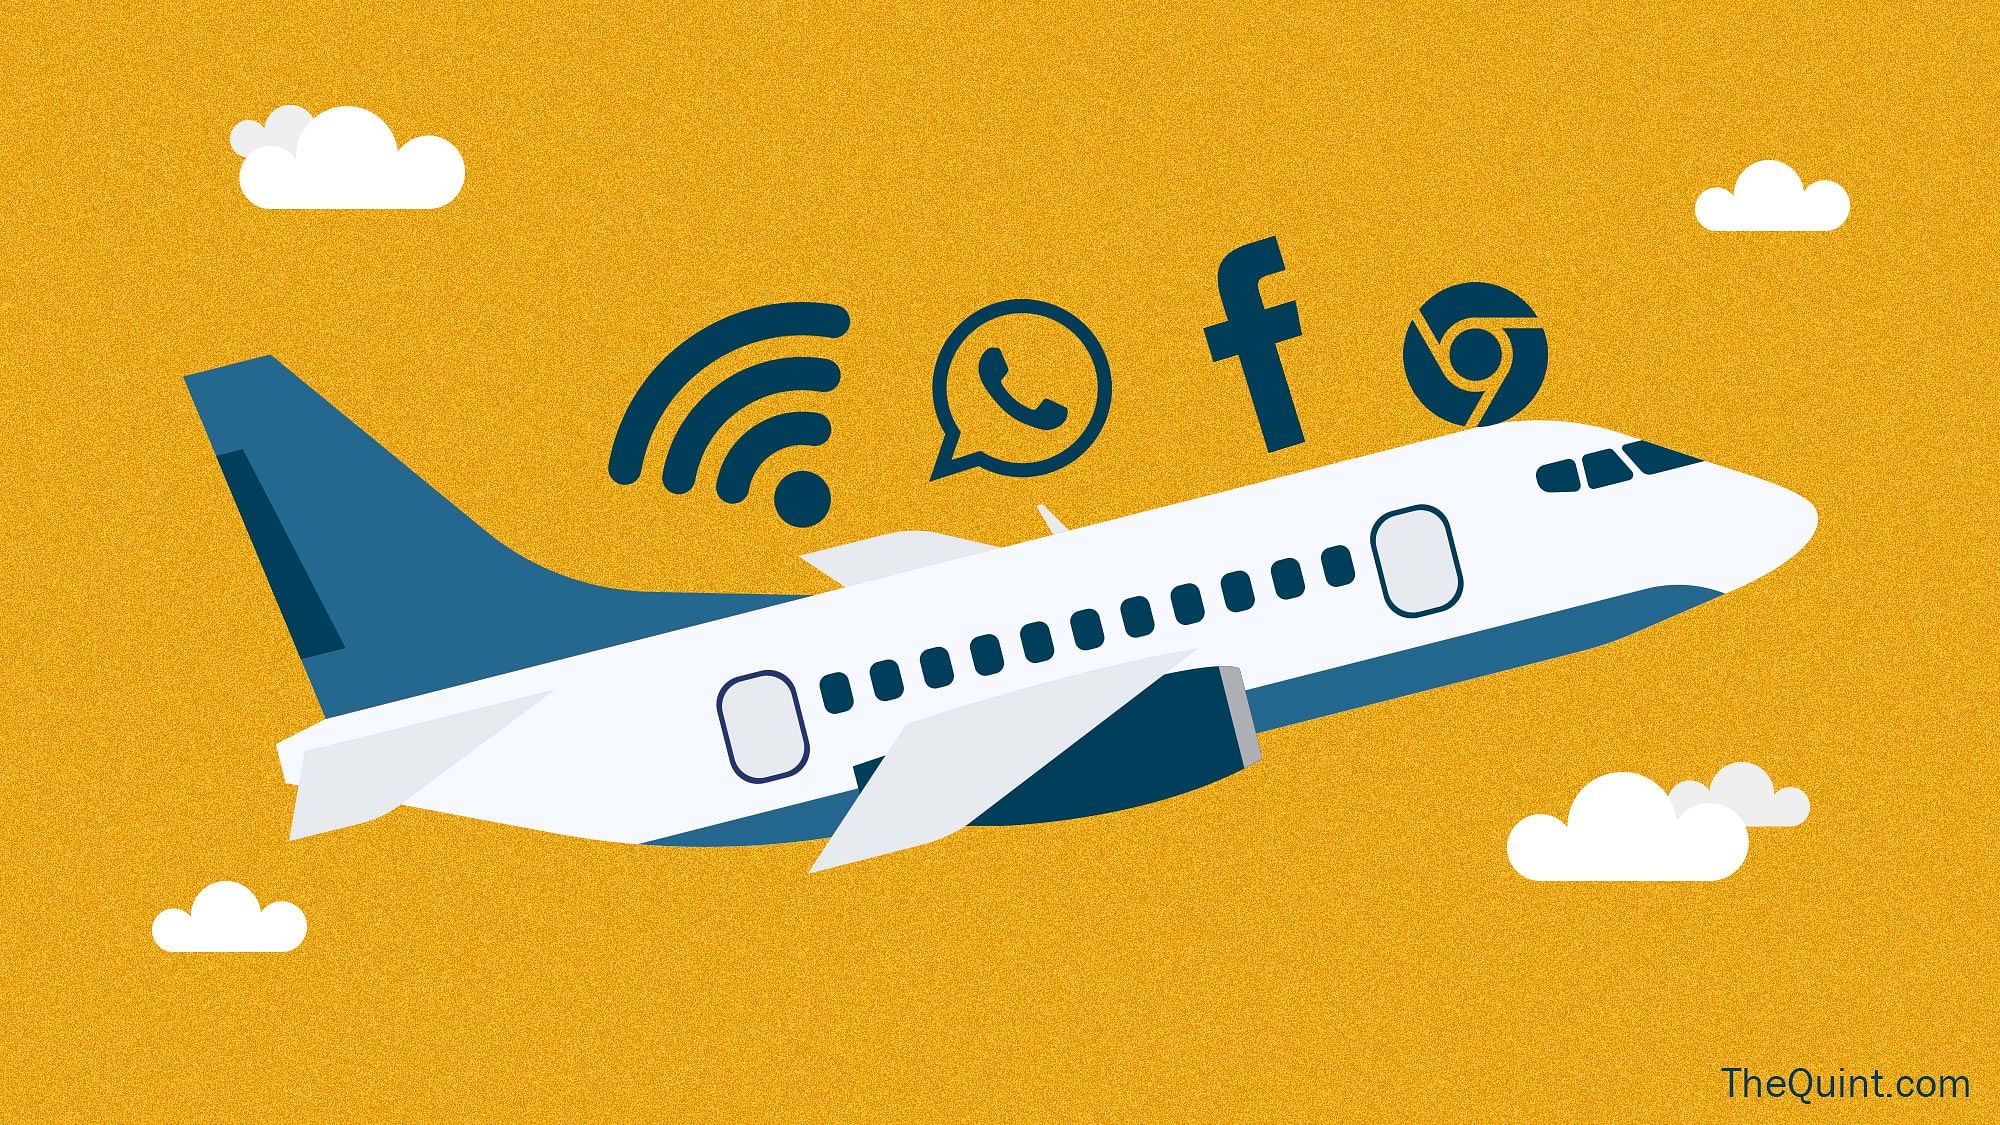 The move comes 11 months after Trai issued its recommendations on inflight connectivity.